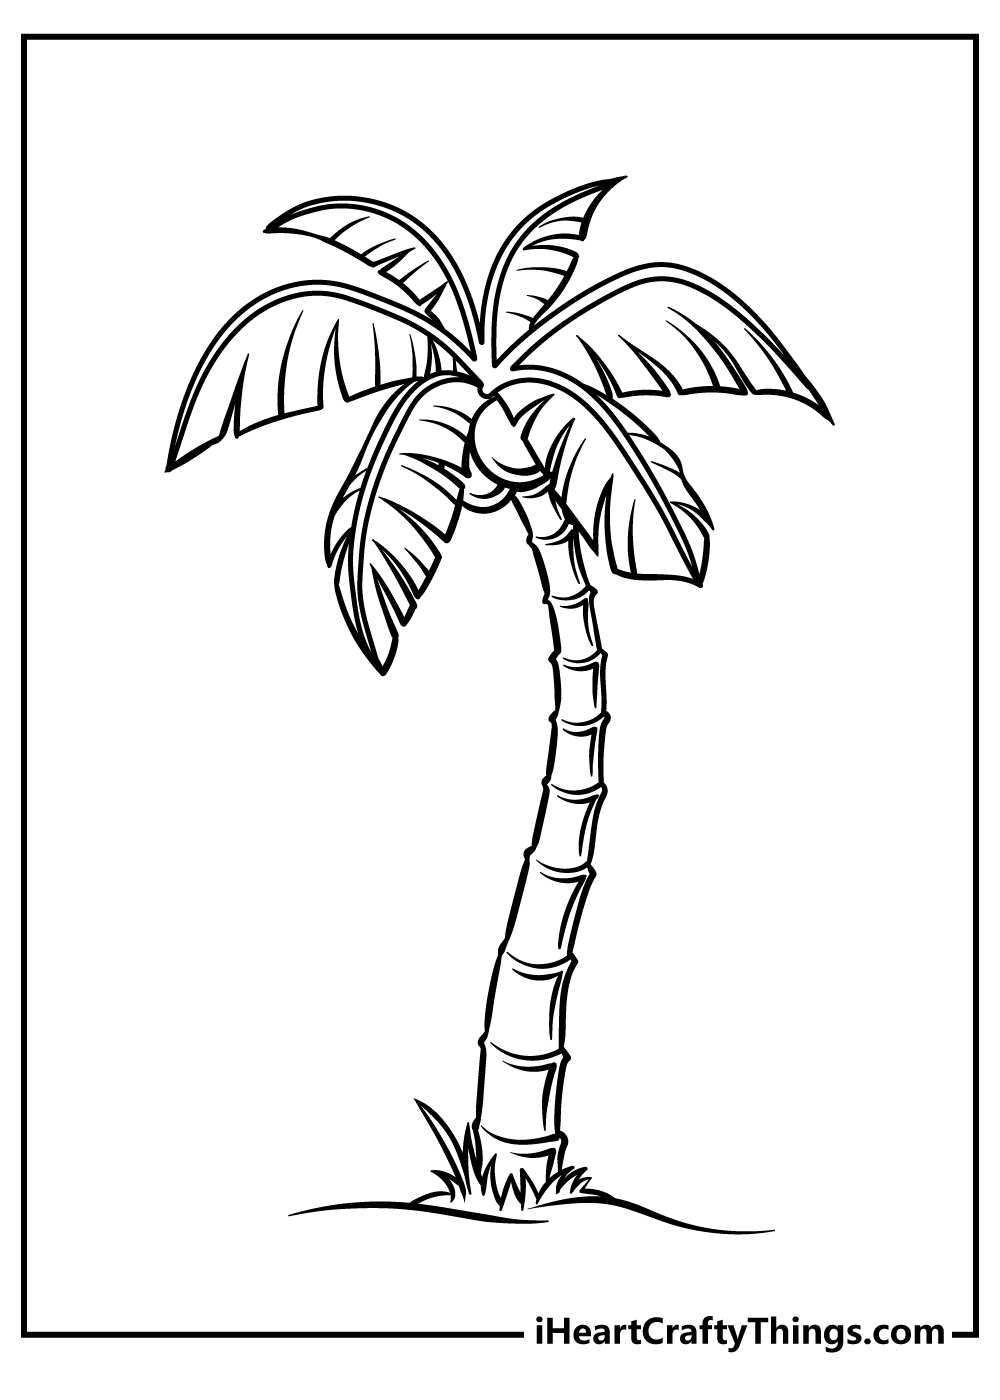 Palm Tree Coloring Sheet for children free download